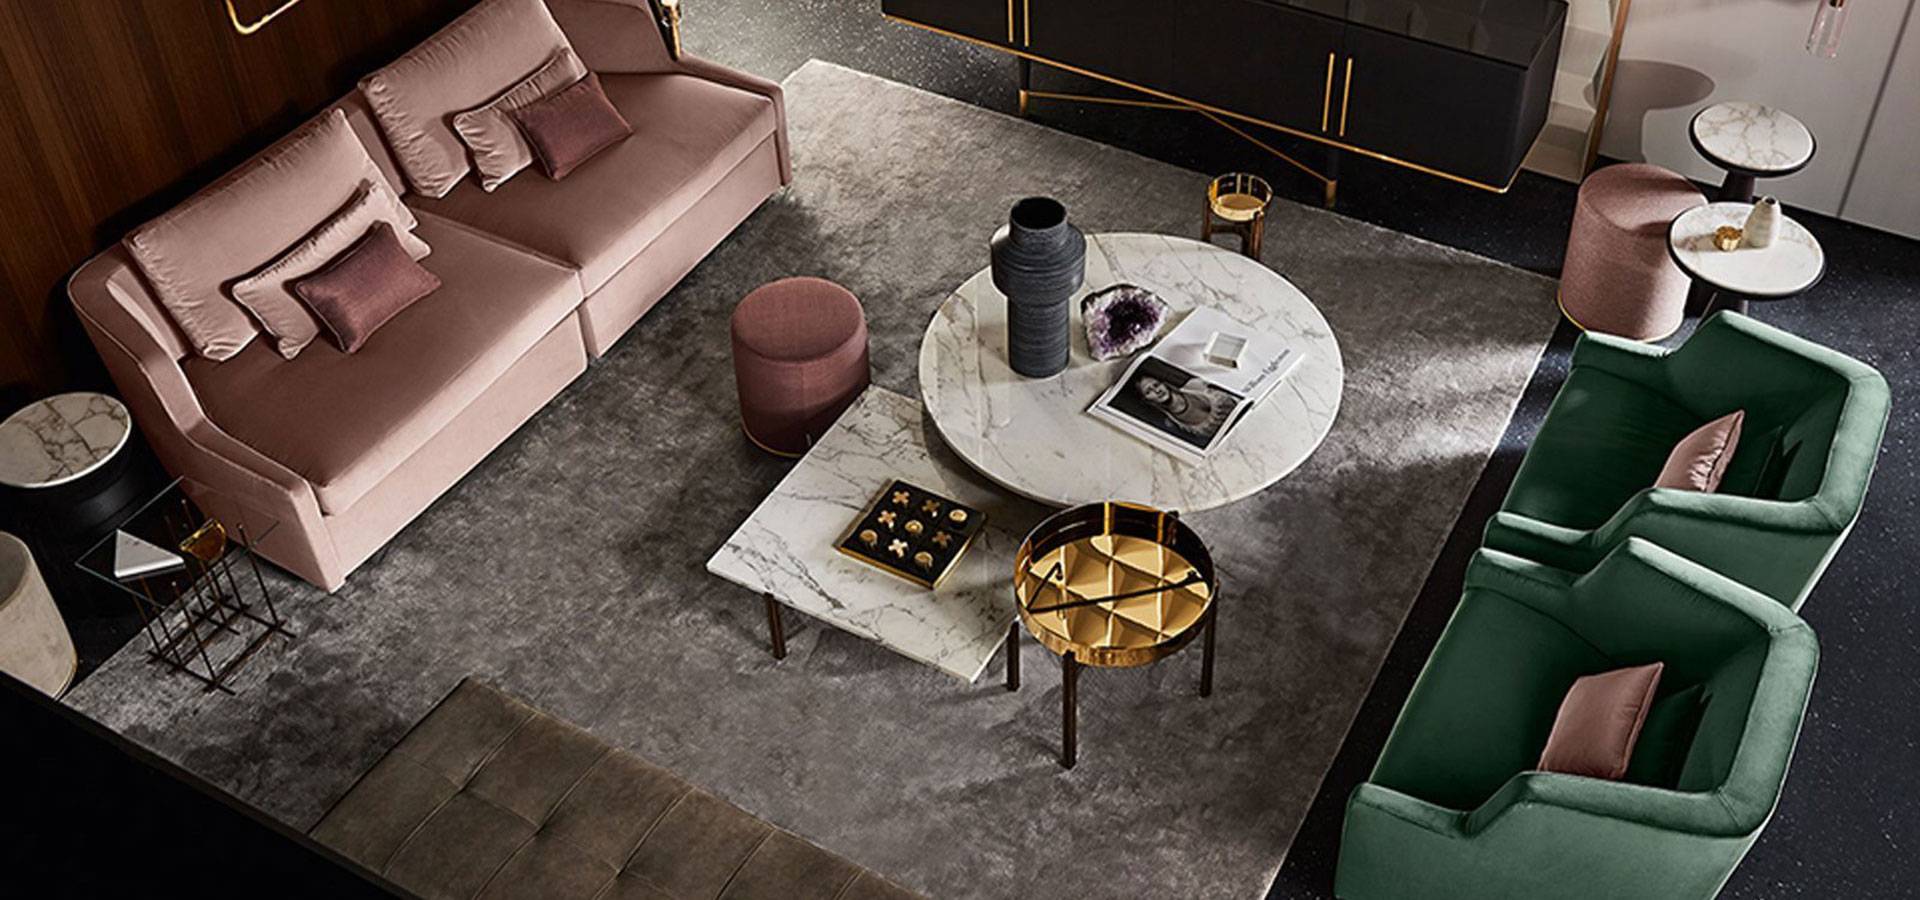 Gallotti And Radice Sofas Grey Velvet Exclusive By Andreotti